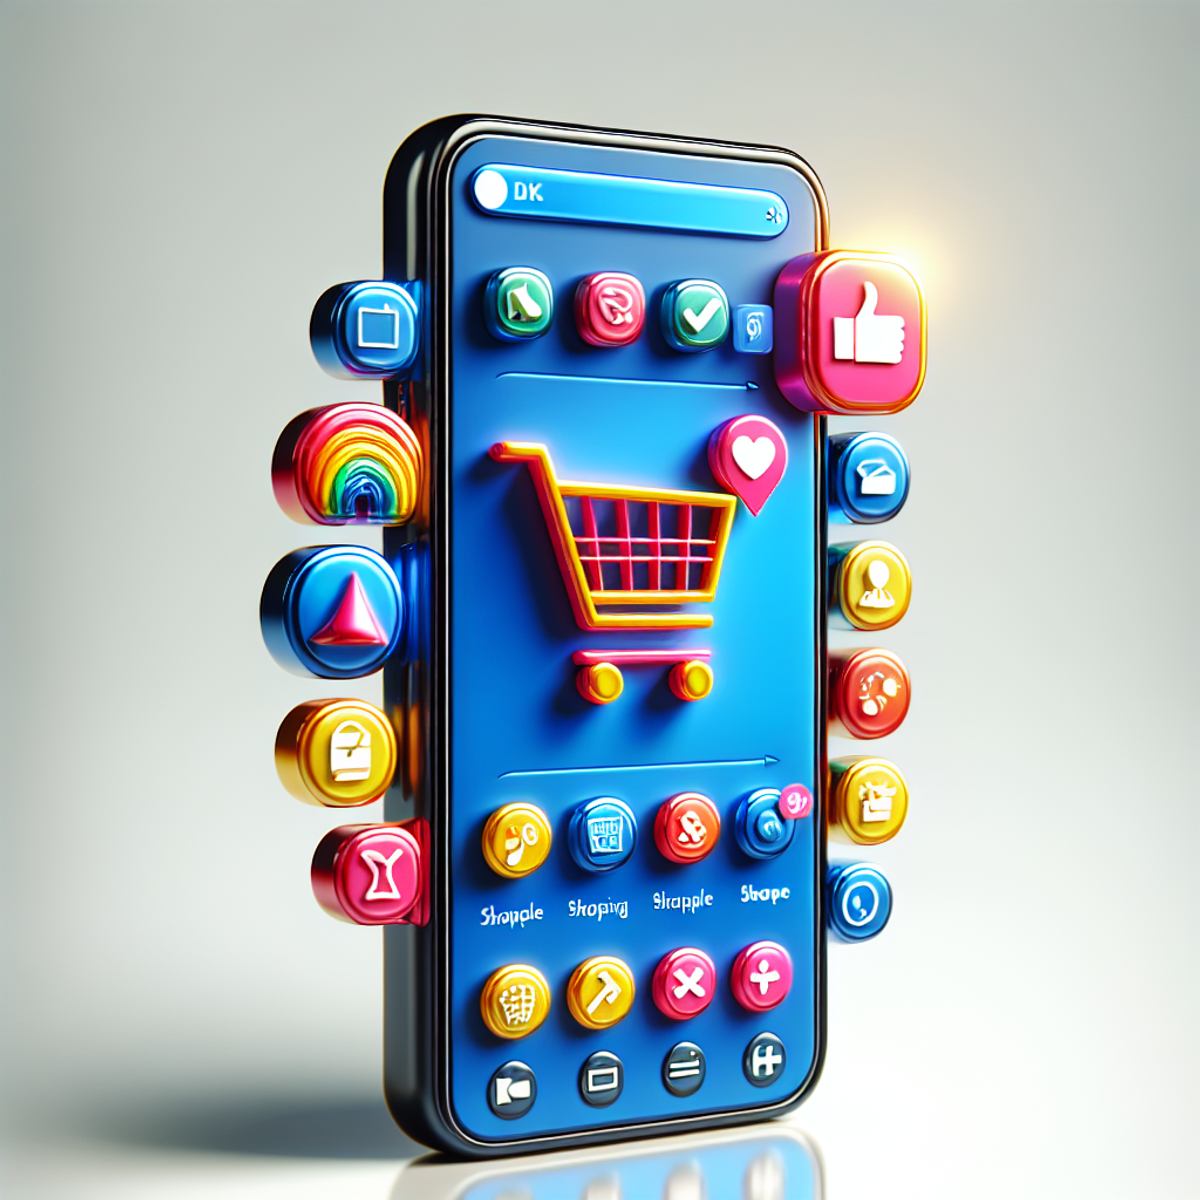 Online shopping mobile app on a smartphone with shopping cart icon and thumbs-up symbol.